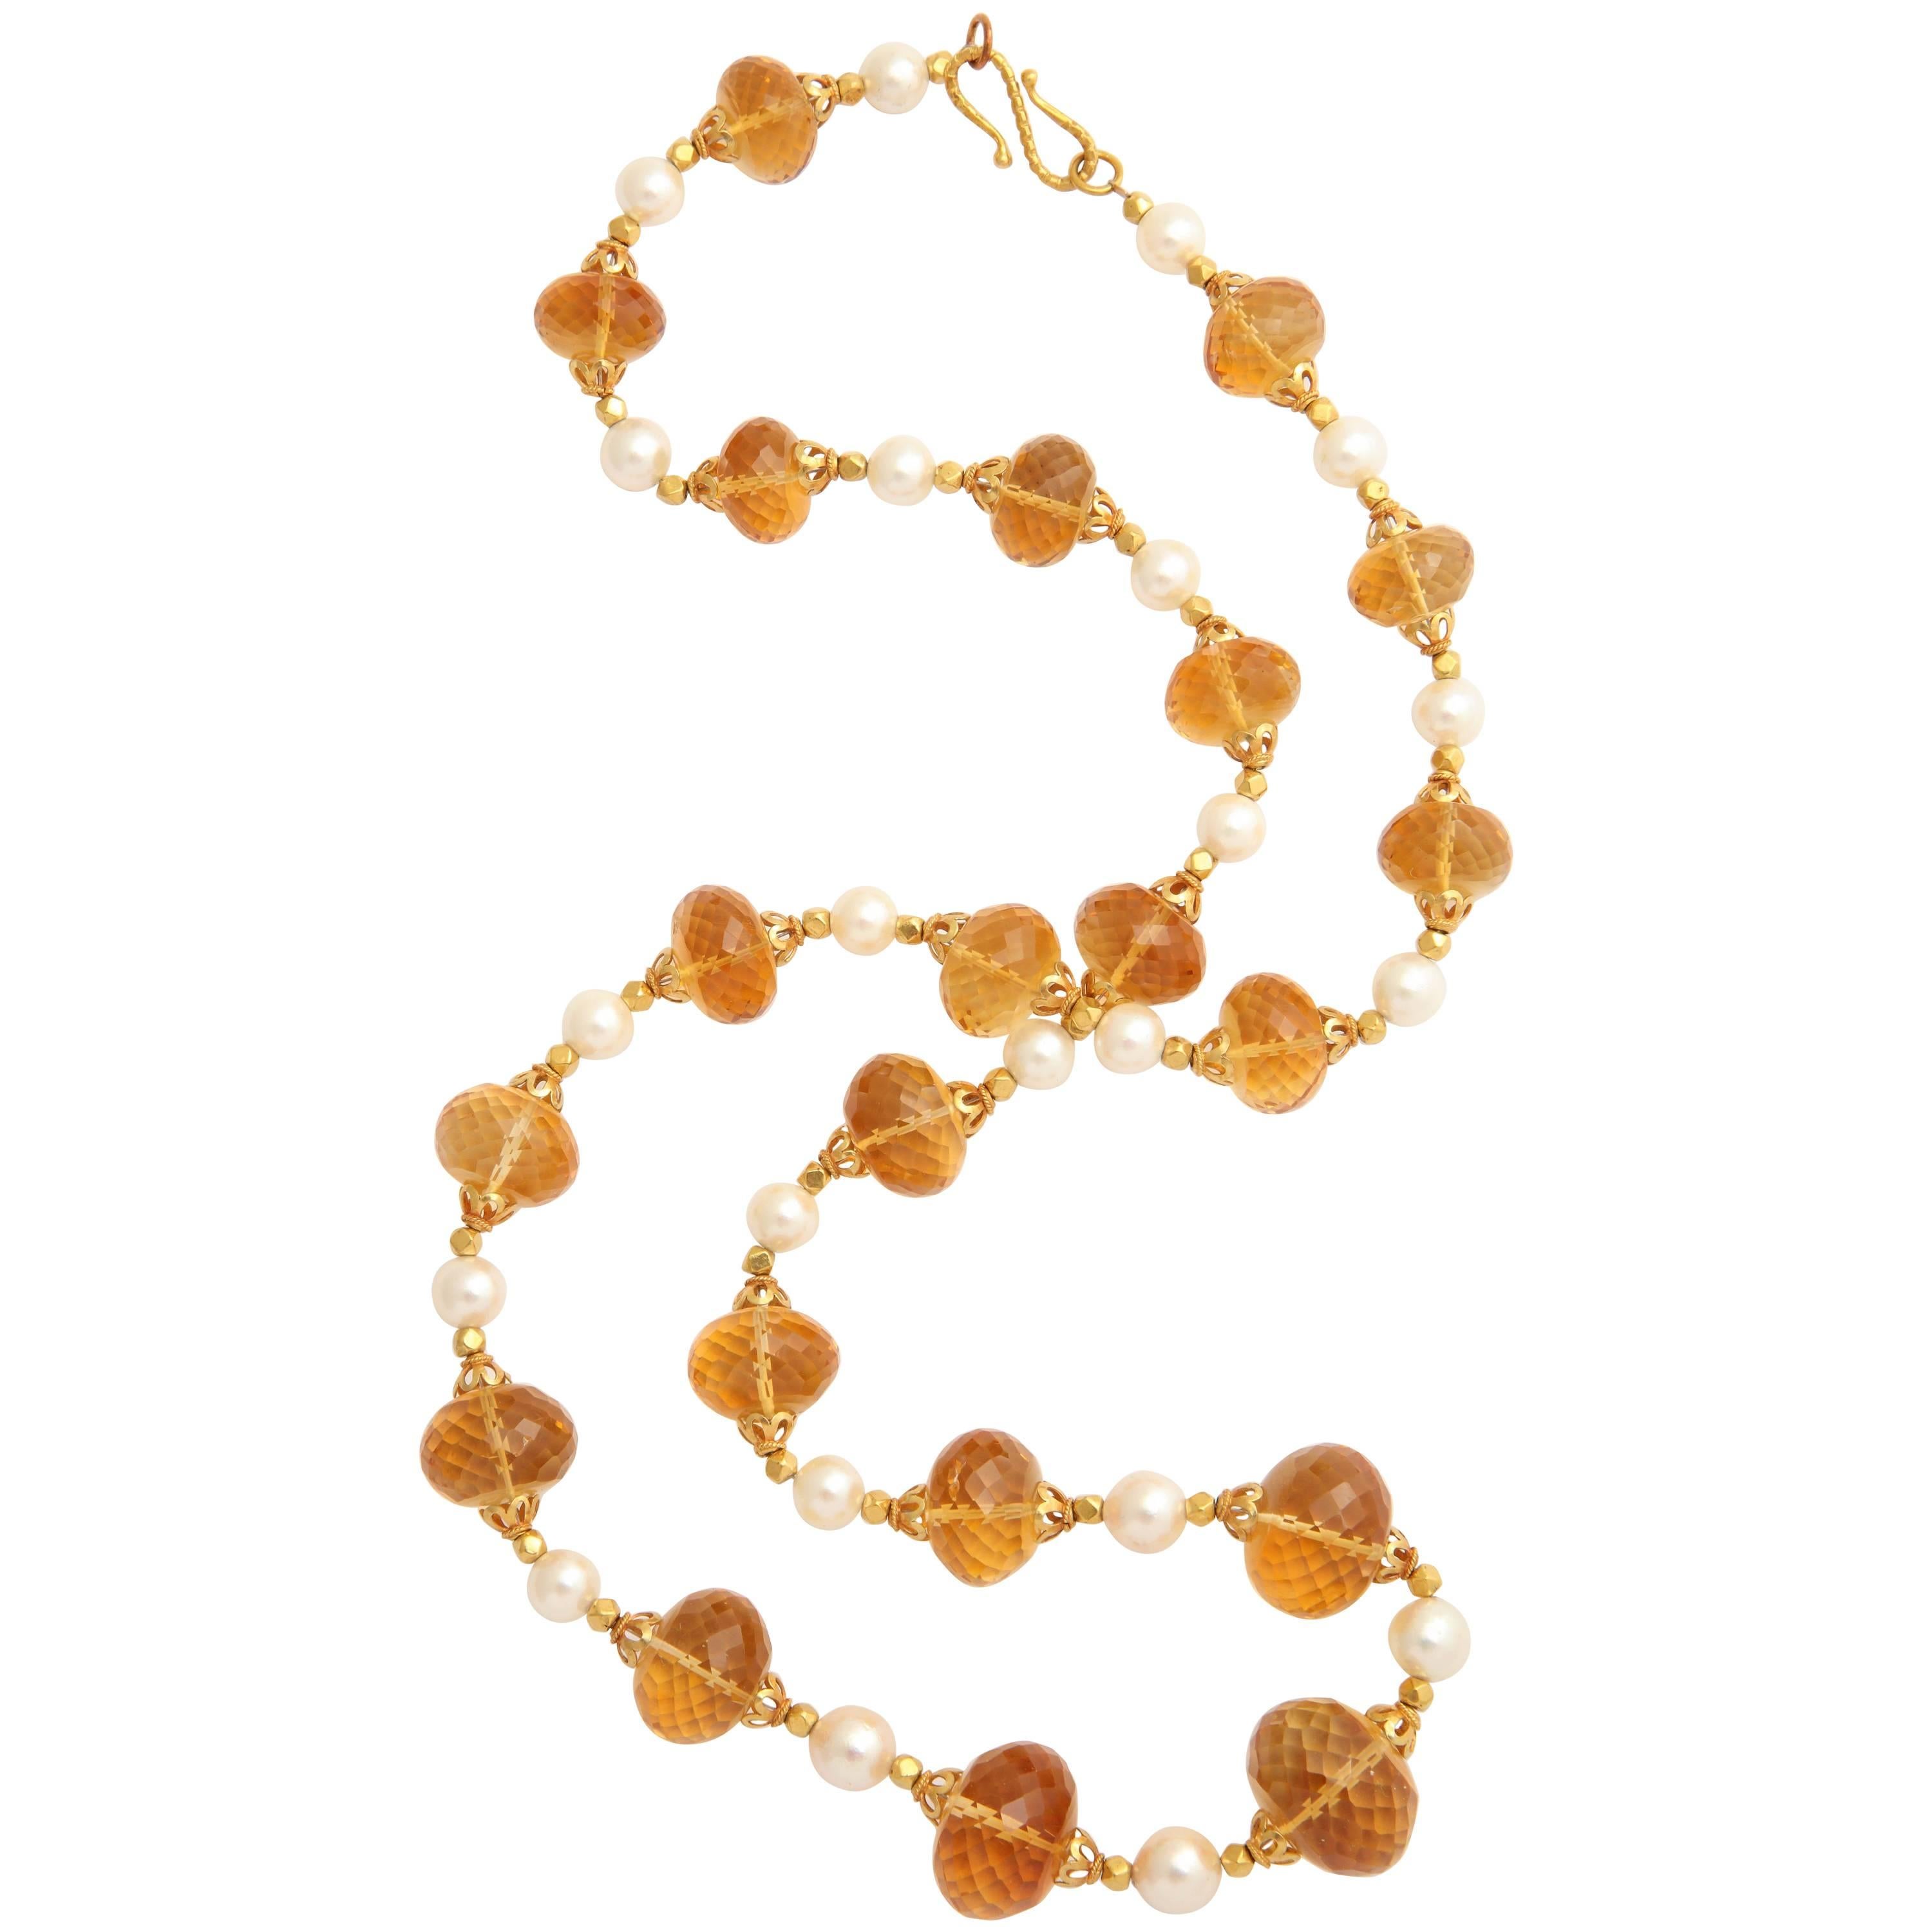 Superb Faceted Citrine Bead, Gold and Pearl Necklace